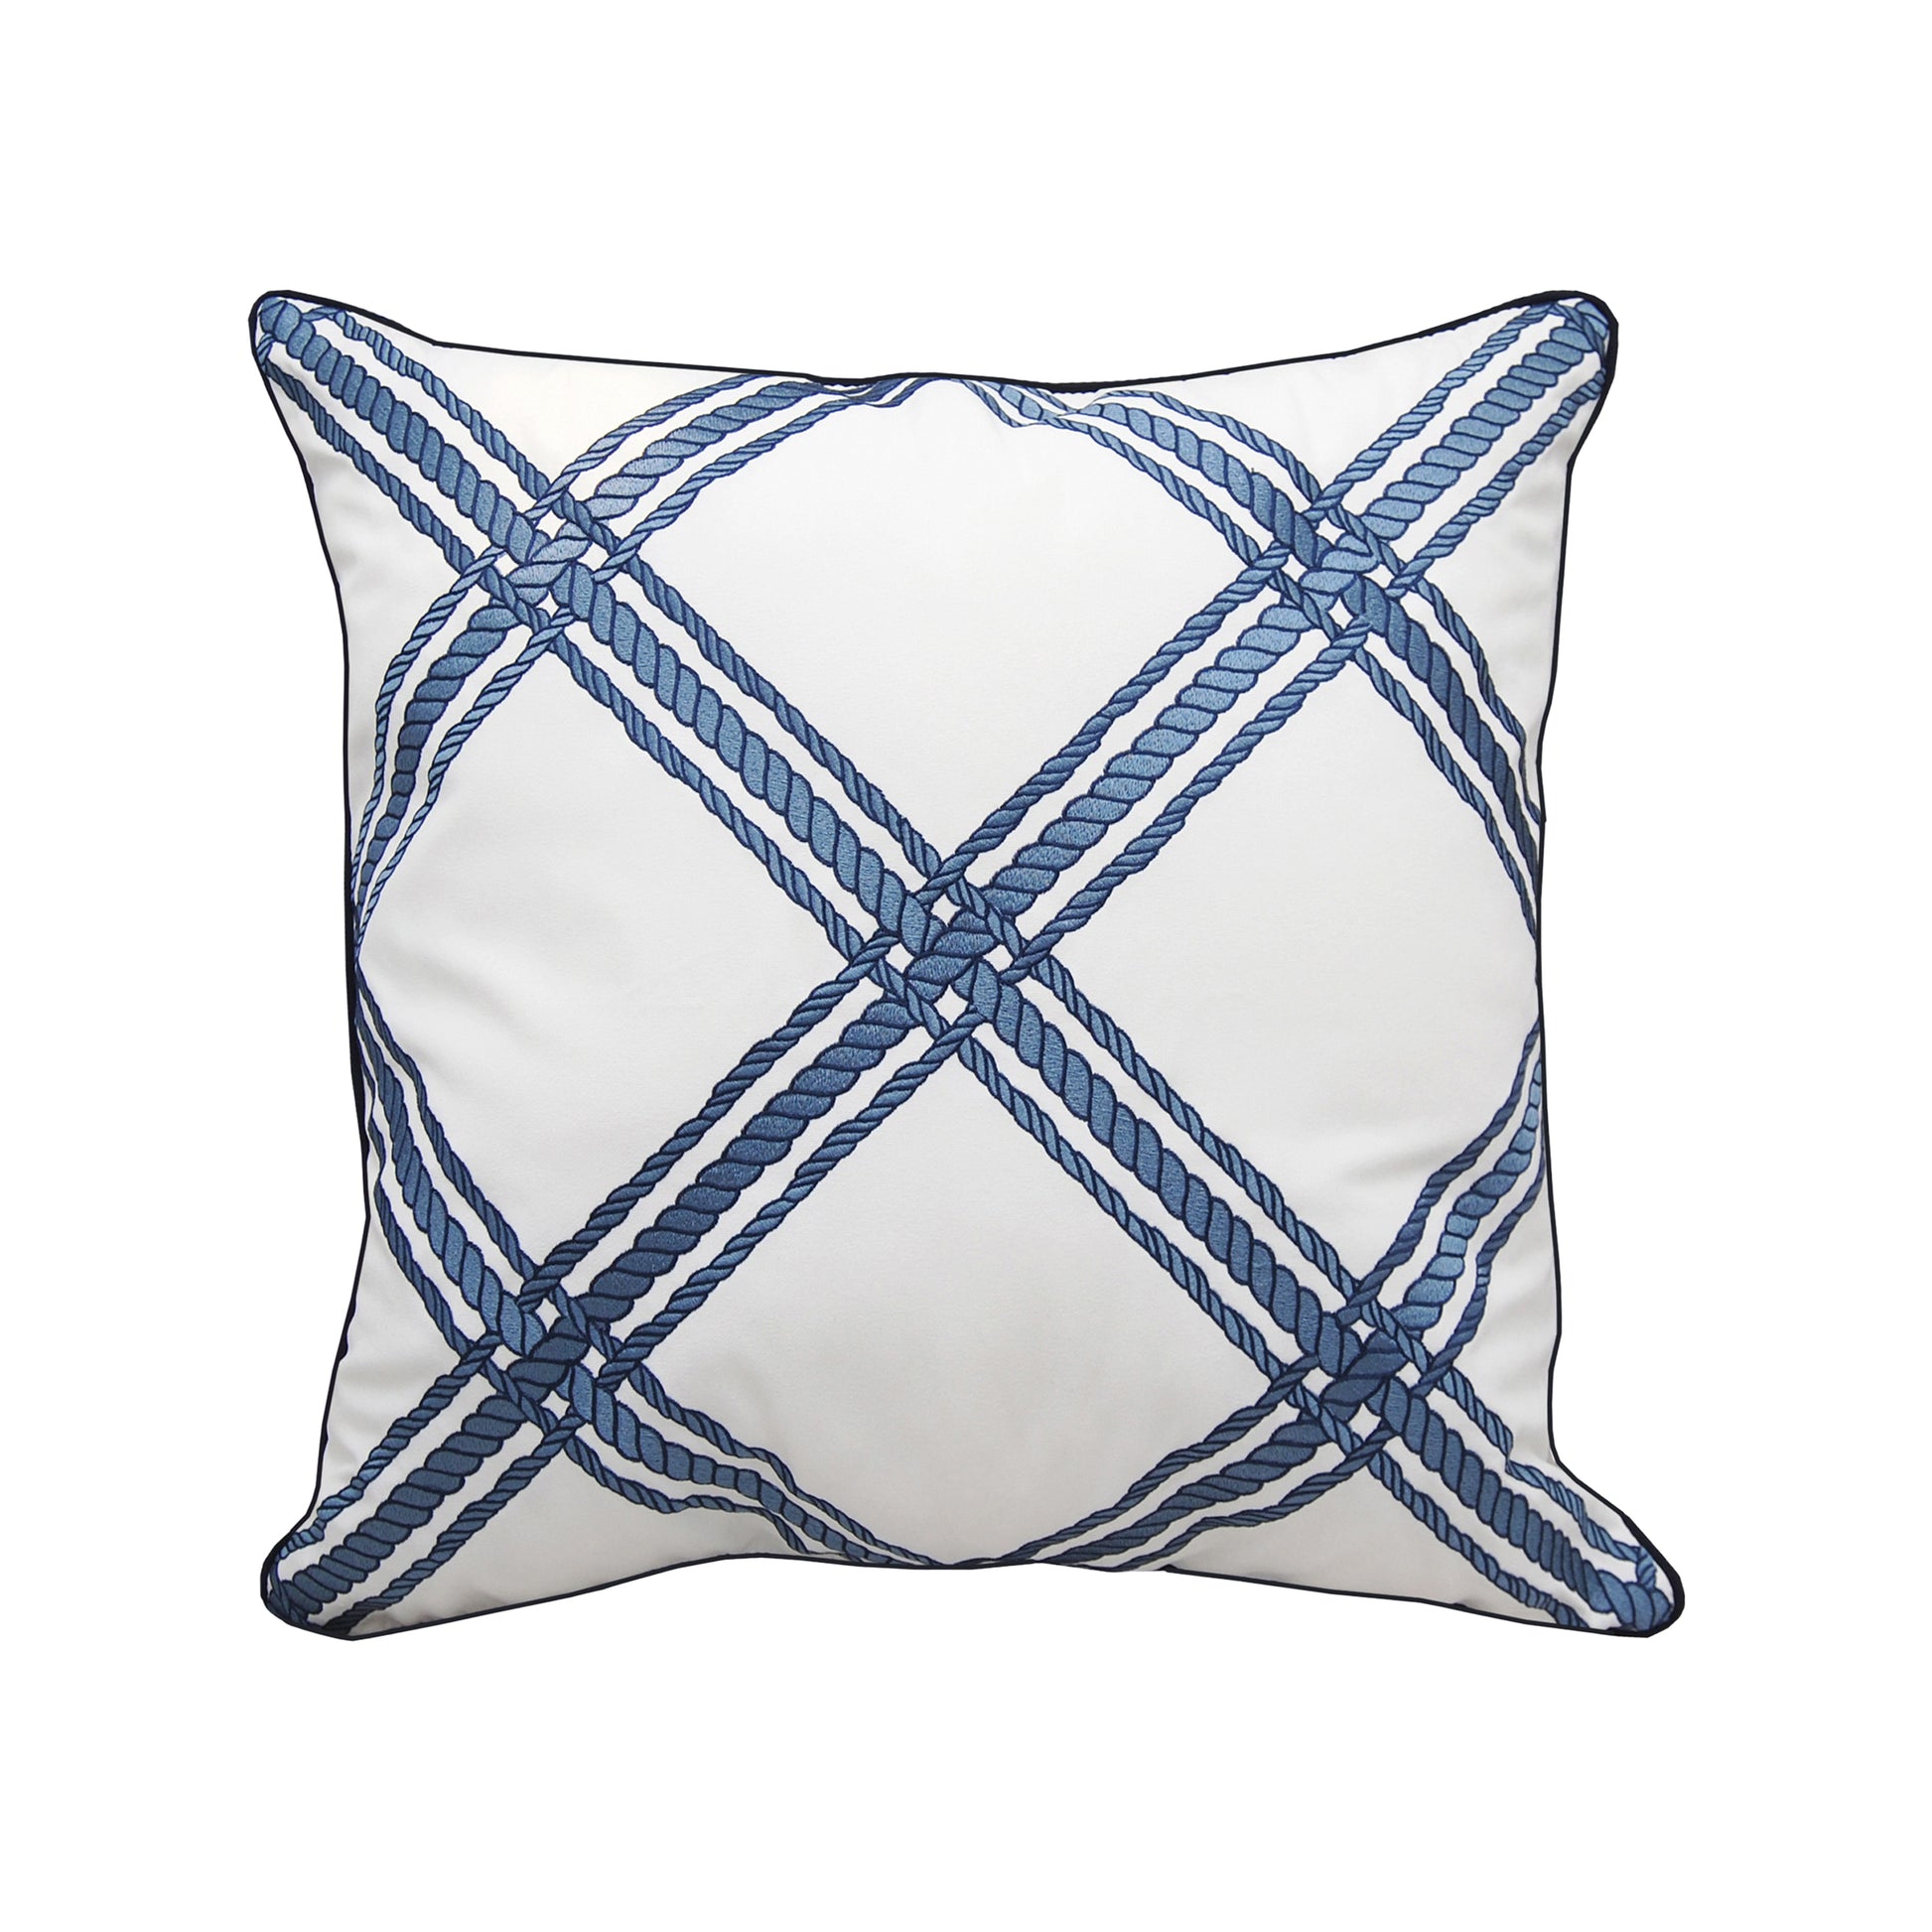 Blue rope lattice pattern embroidered on a white background. Pillow finished with blue piped edging.